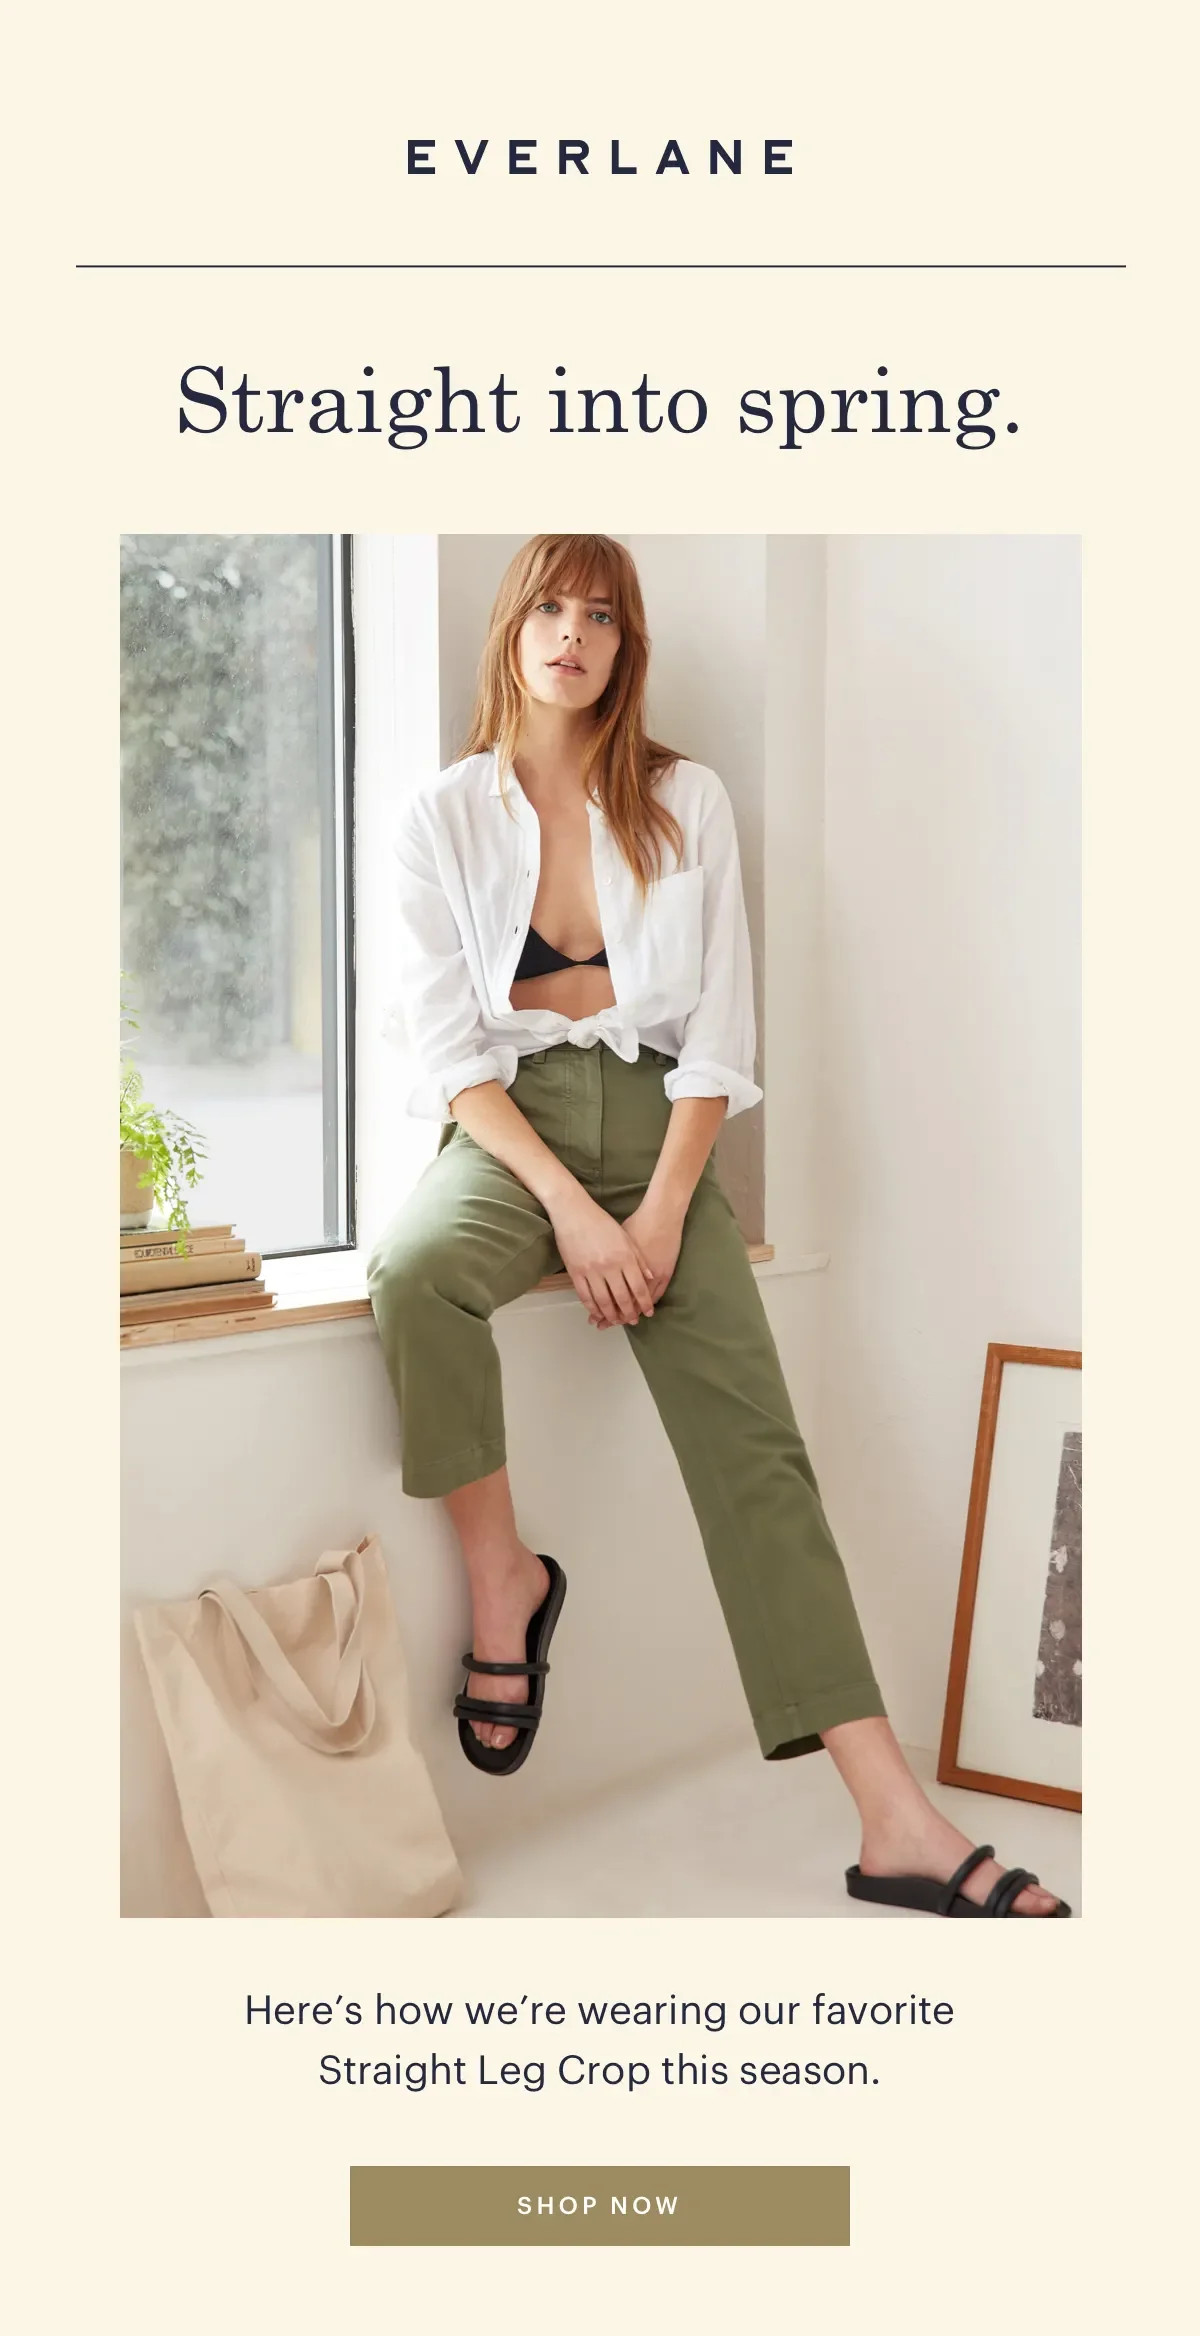 Here's how we're wearing our favorite Straight Leg Crop this season. SHOP NOW